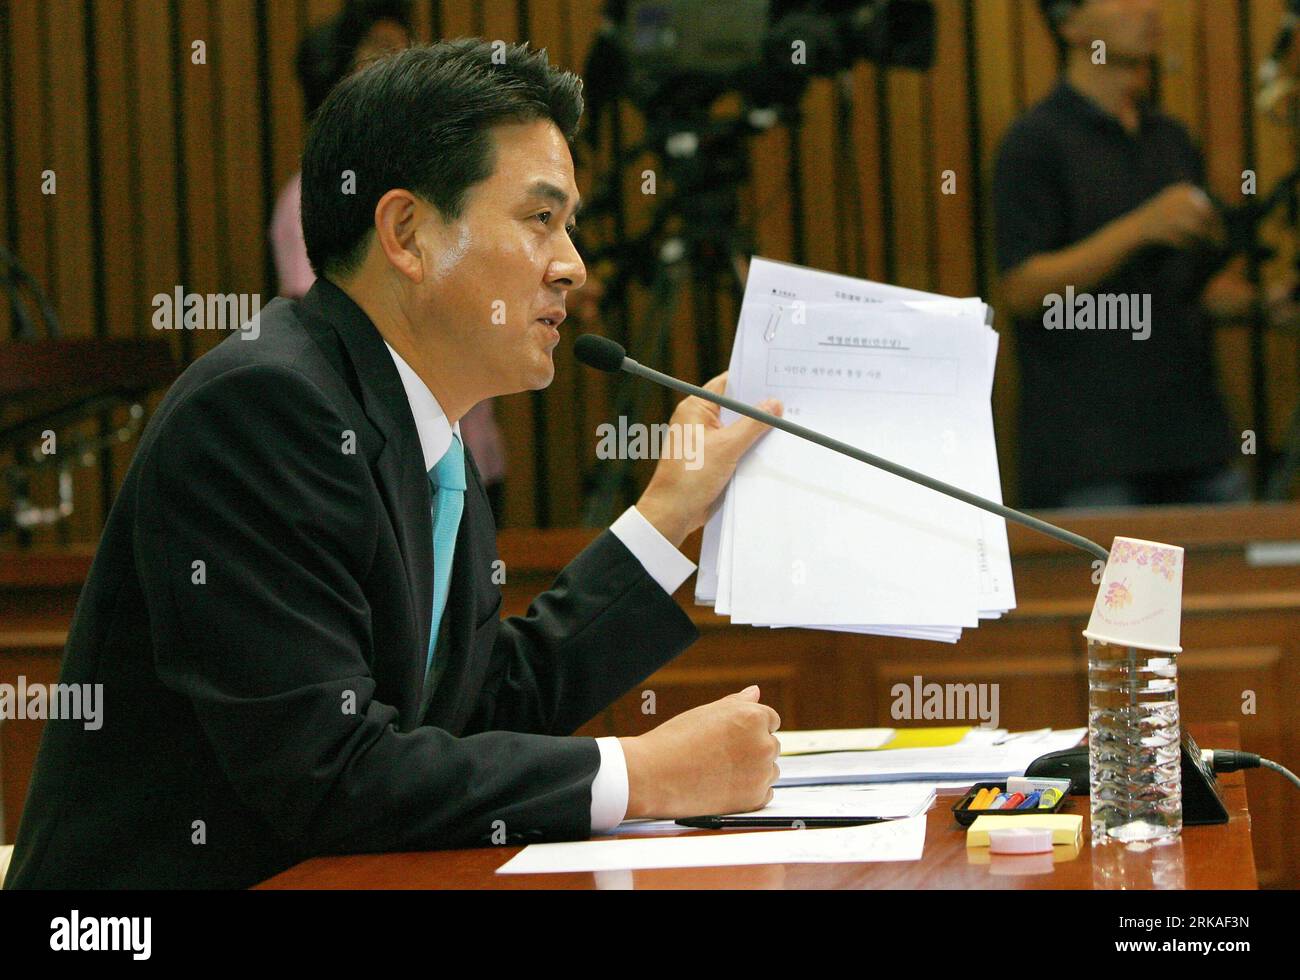 Bildnummer: 54342424  Datum: 24.08.2010  Copyright: imago/Xinhua (100824) -- SEOUL, Aug. 24, 2010 (Xinhua) -- South Korean Prime Minister-nominee Kim Tae-ho answers questions at a parliamentary confirmation hearing in Seoul, capital of South Korea, on Aug. 24. 2010. Kim Tae-ho faced a tough grilling at a parliamentary confirmation hearing Tuesday, as the 48-year-old former governor seeks to become the youngest in four decades to take up the top Cabinet job. (Xinhua/Park Jin-hee)(djj) SOUTH KOREA-SEOUL-POLITICS PUBLICATIONxNOTxINxCHN People Politik kbdig xcb 2010 quer premiumd xint     Bildnumm Stock Photo